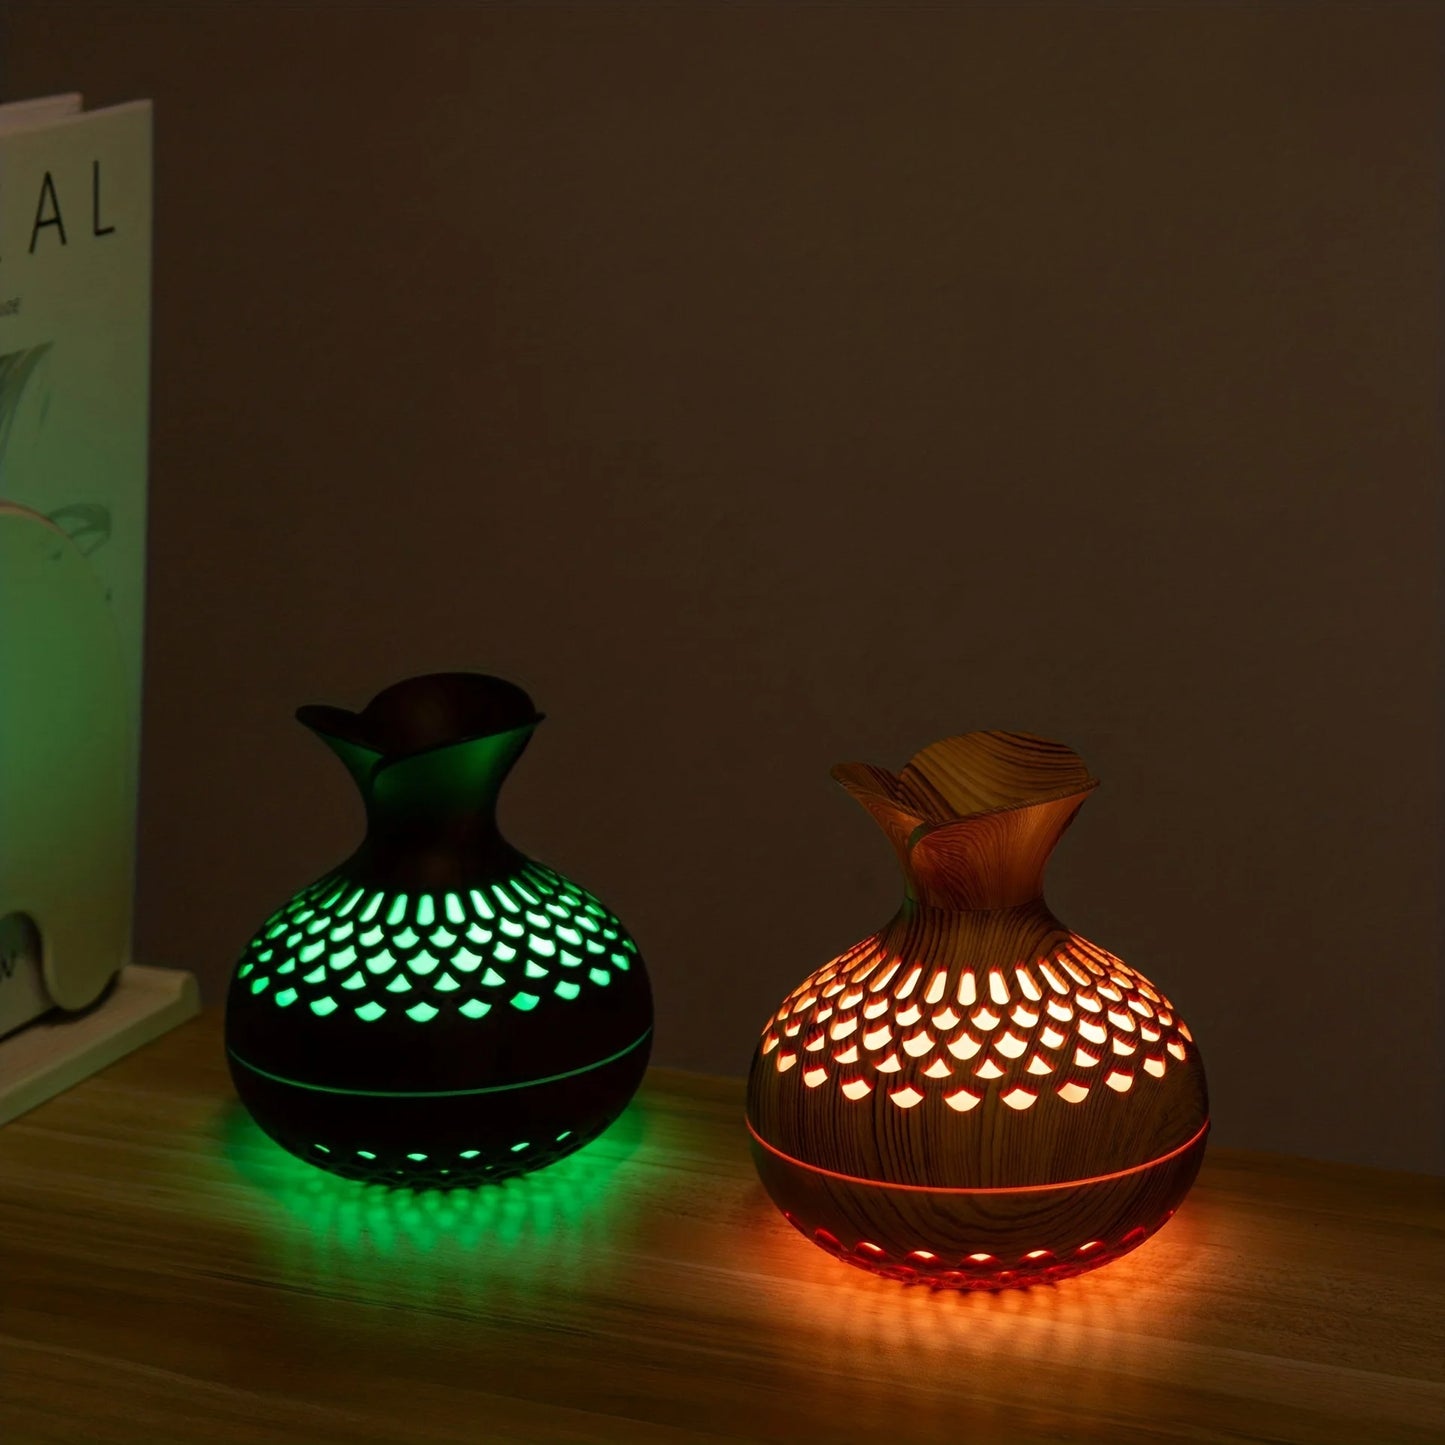 Wooden Vase Humidifier Aromatherapy Oil Diffuser